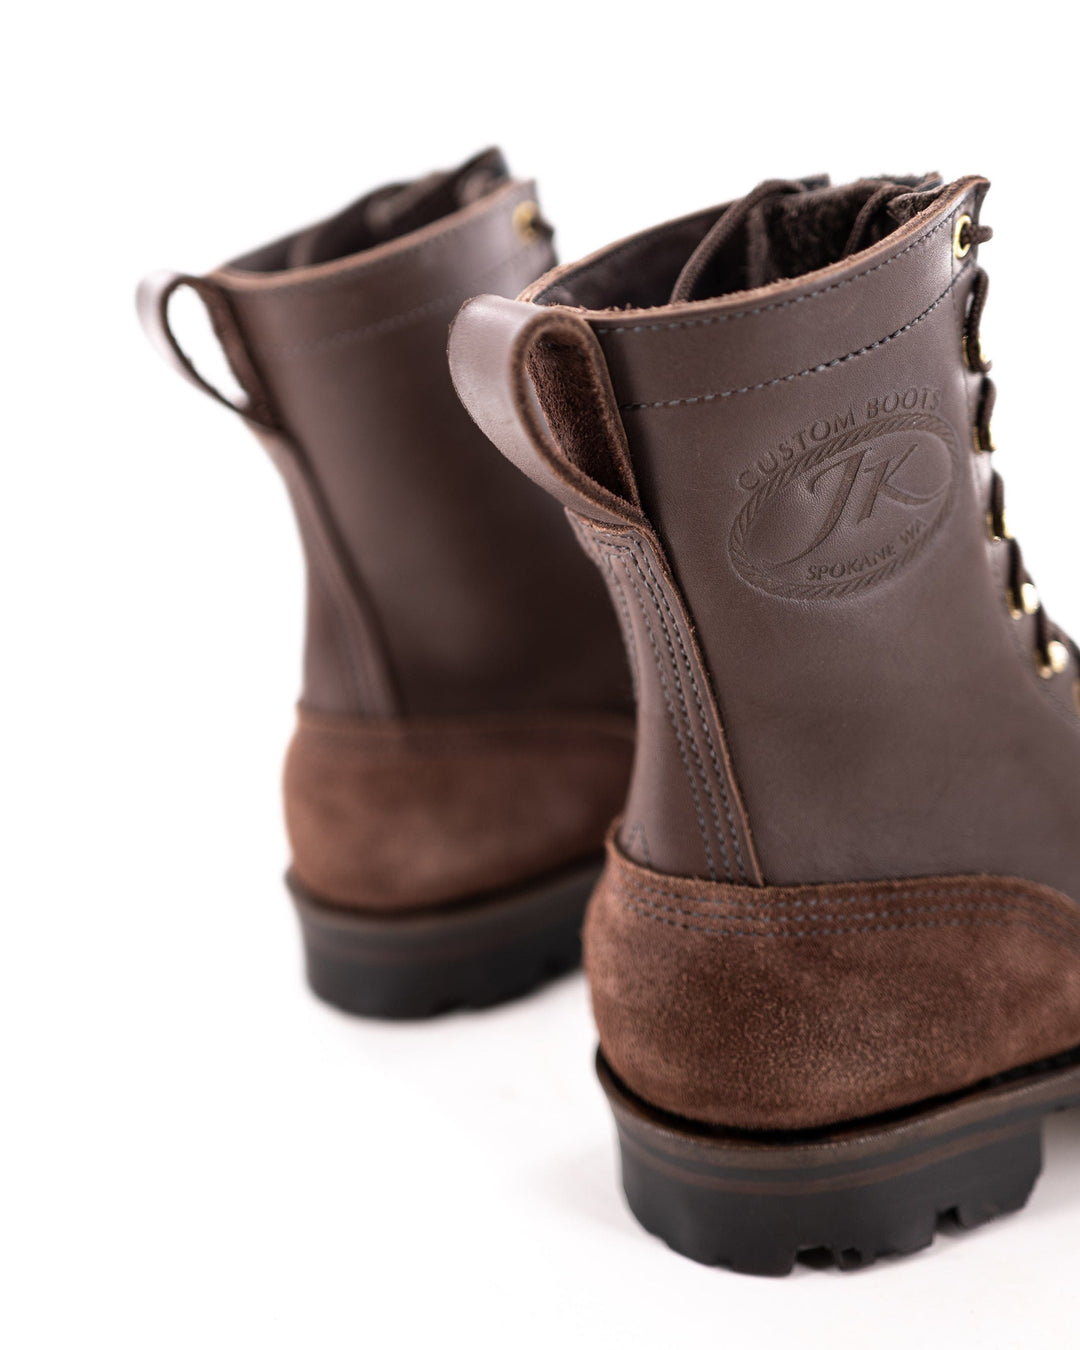 Superduty (S) (Safety Toe) - Brown